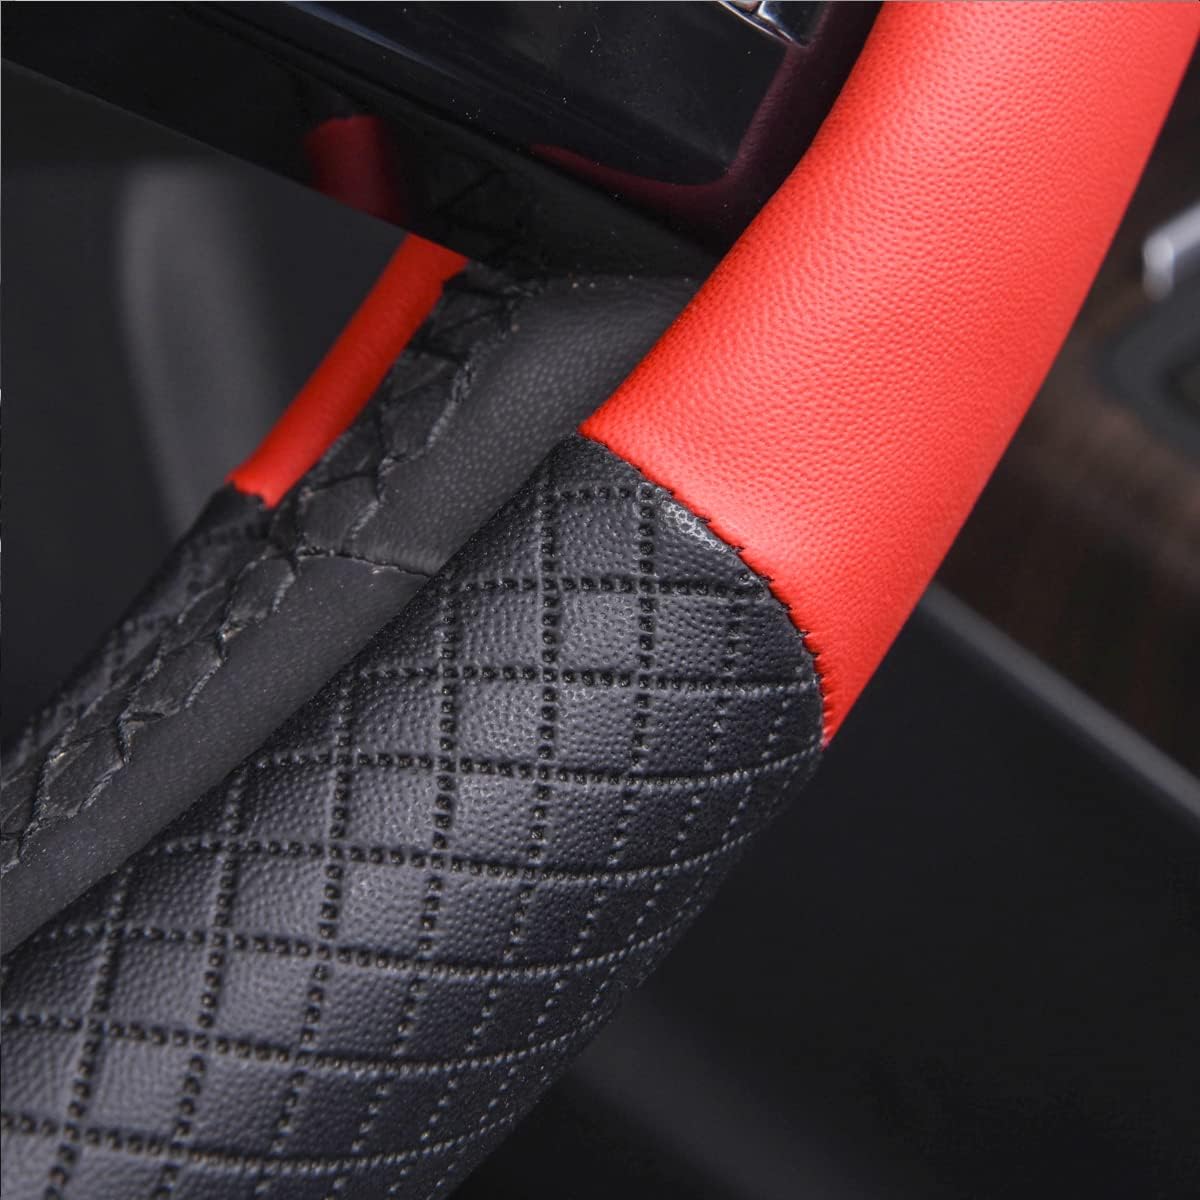 CAR PASS Line Rider Microfiber Leather Sporty Steering Wheel Cover Universal Fits for 95% Truck,SUV,Cars,14.5-15inch Anti-Slip Safety Comfortable Desgin (Black-Blue)